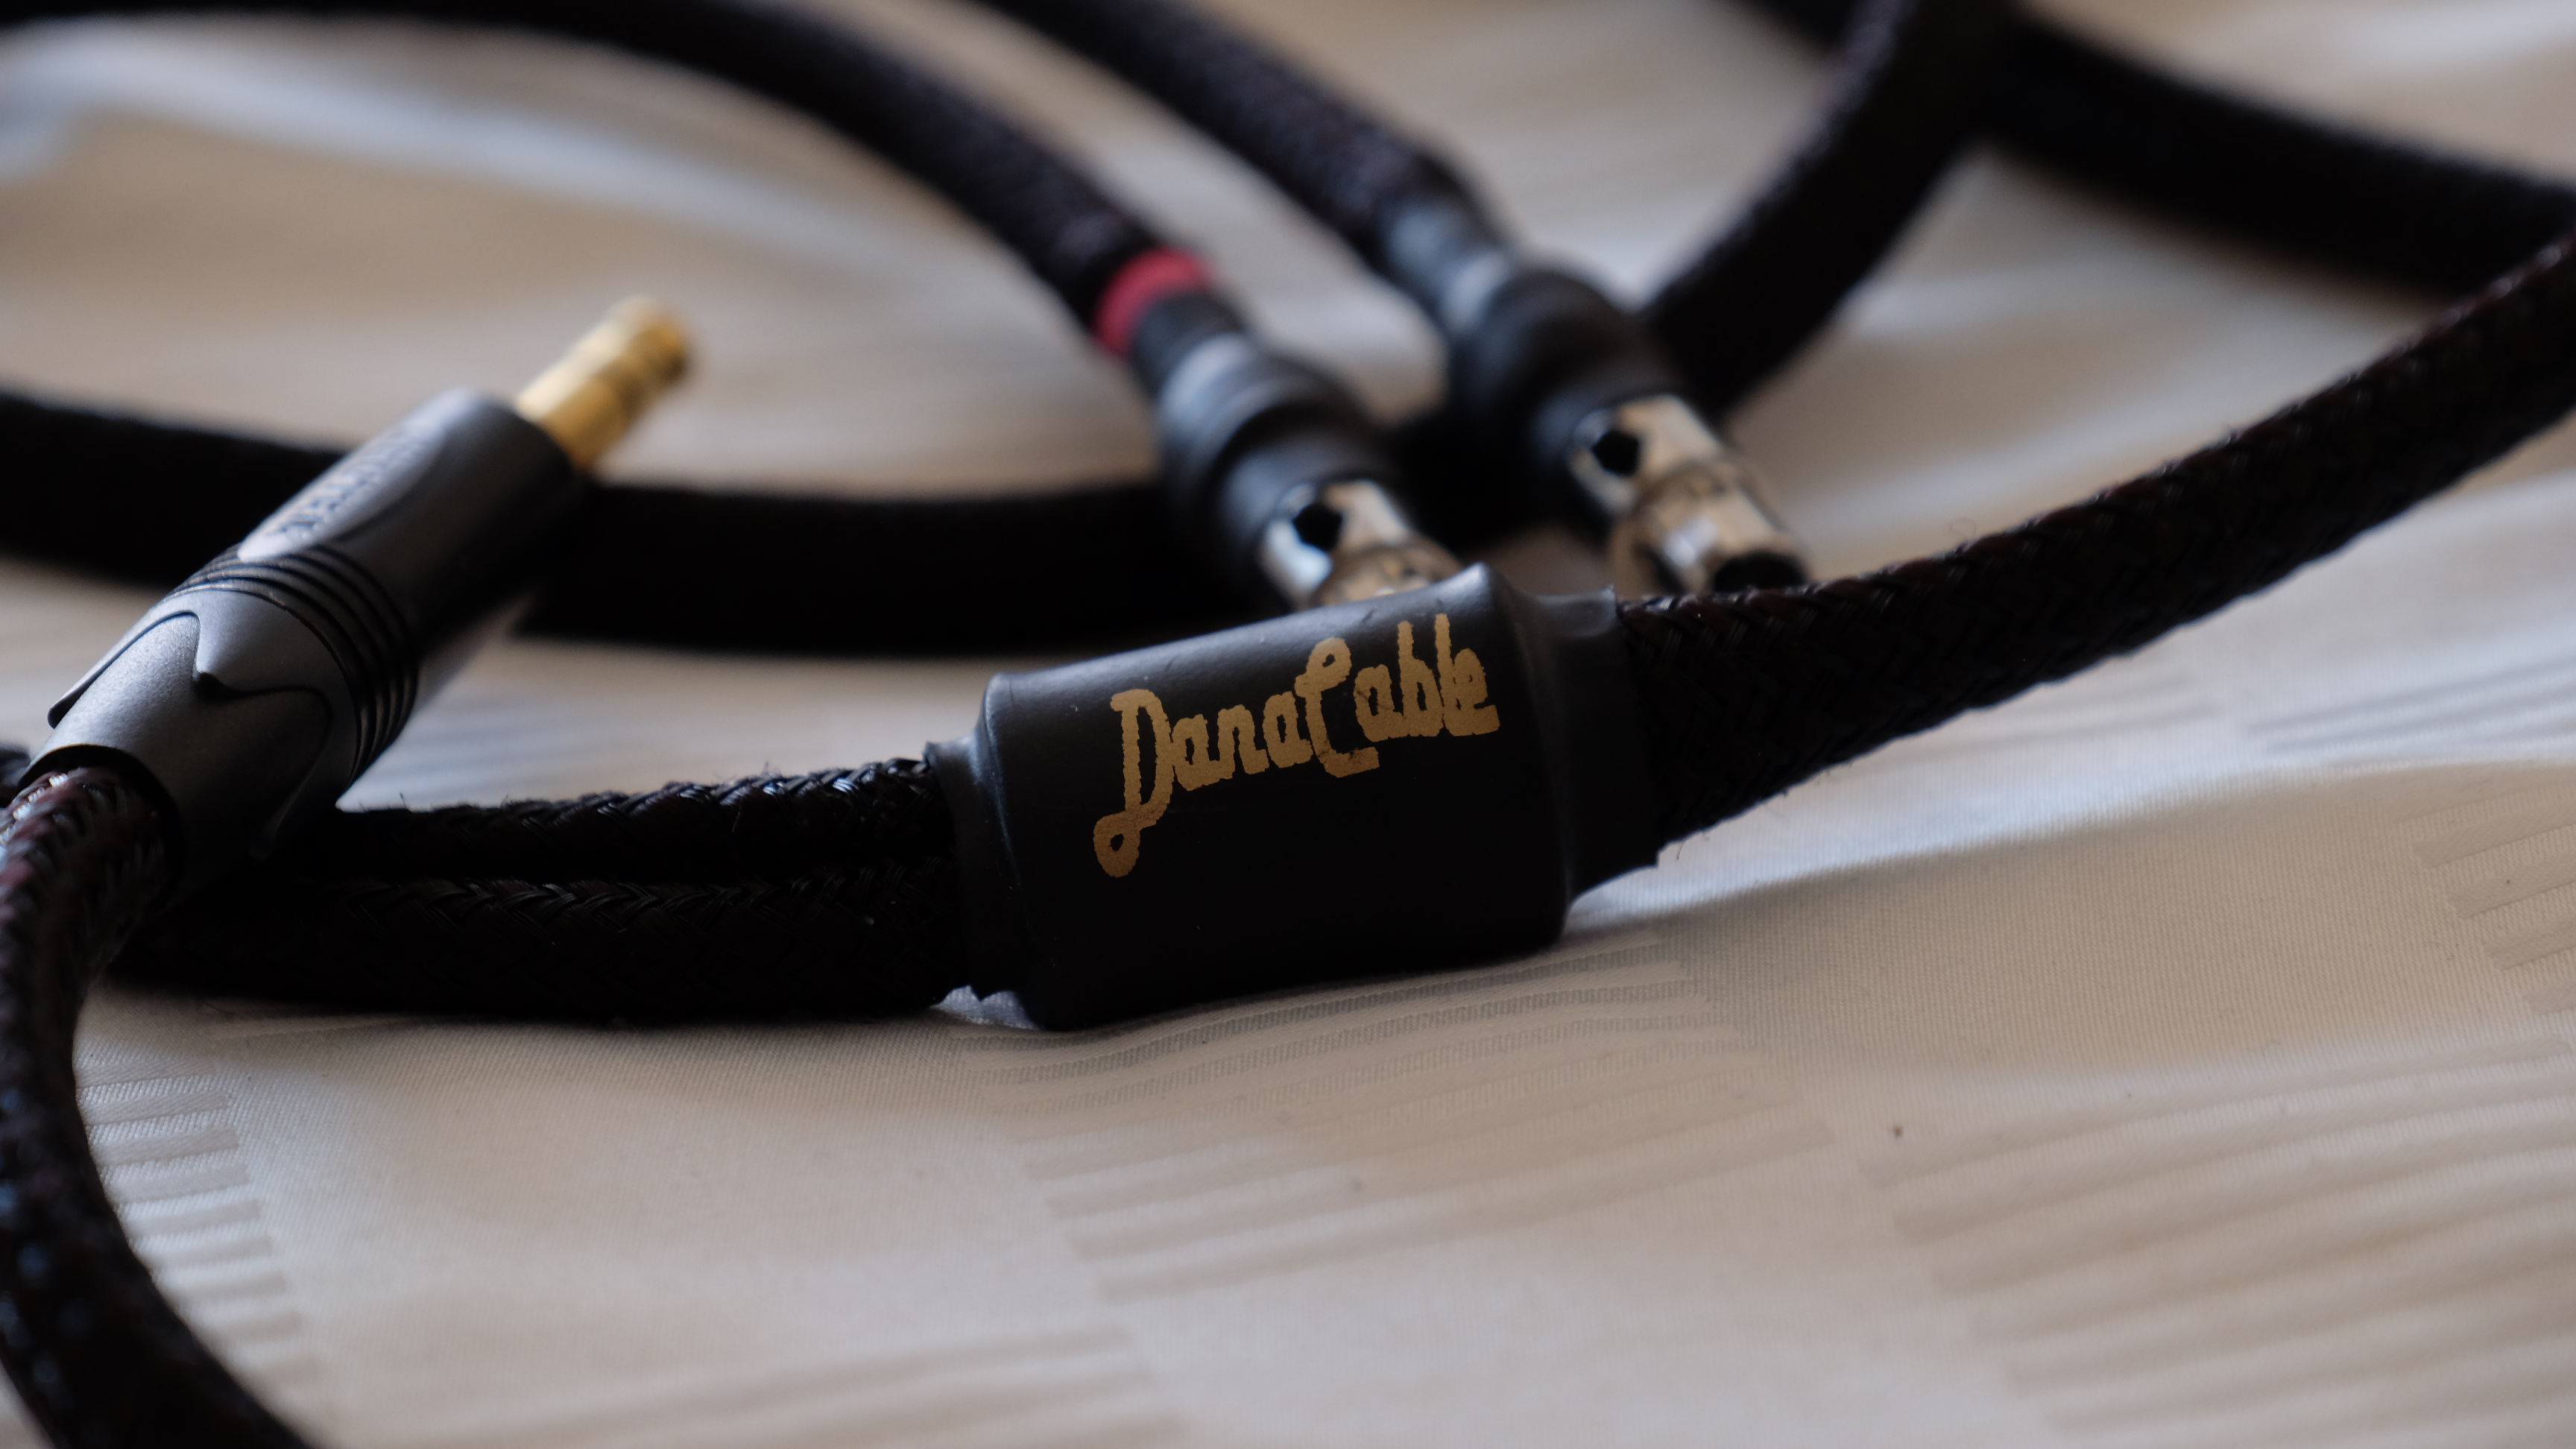 Danacable Lazuli AB for Abyss Headphone Cable Review